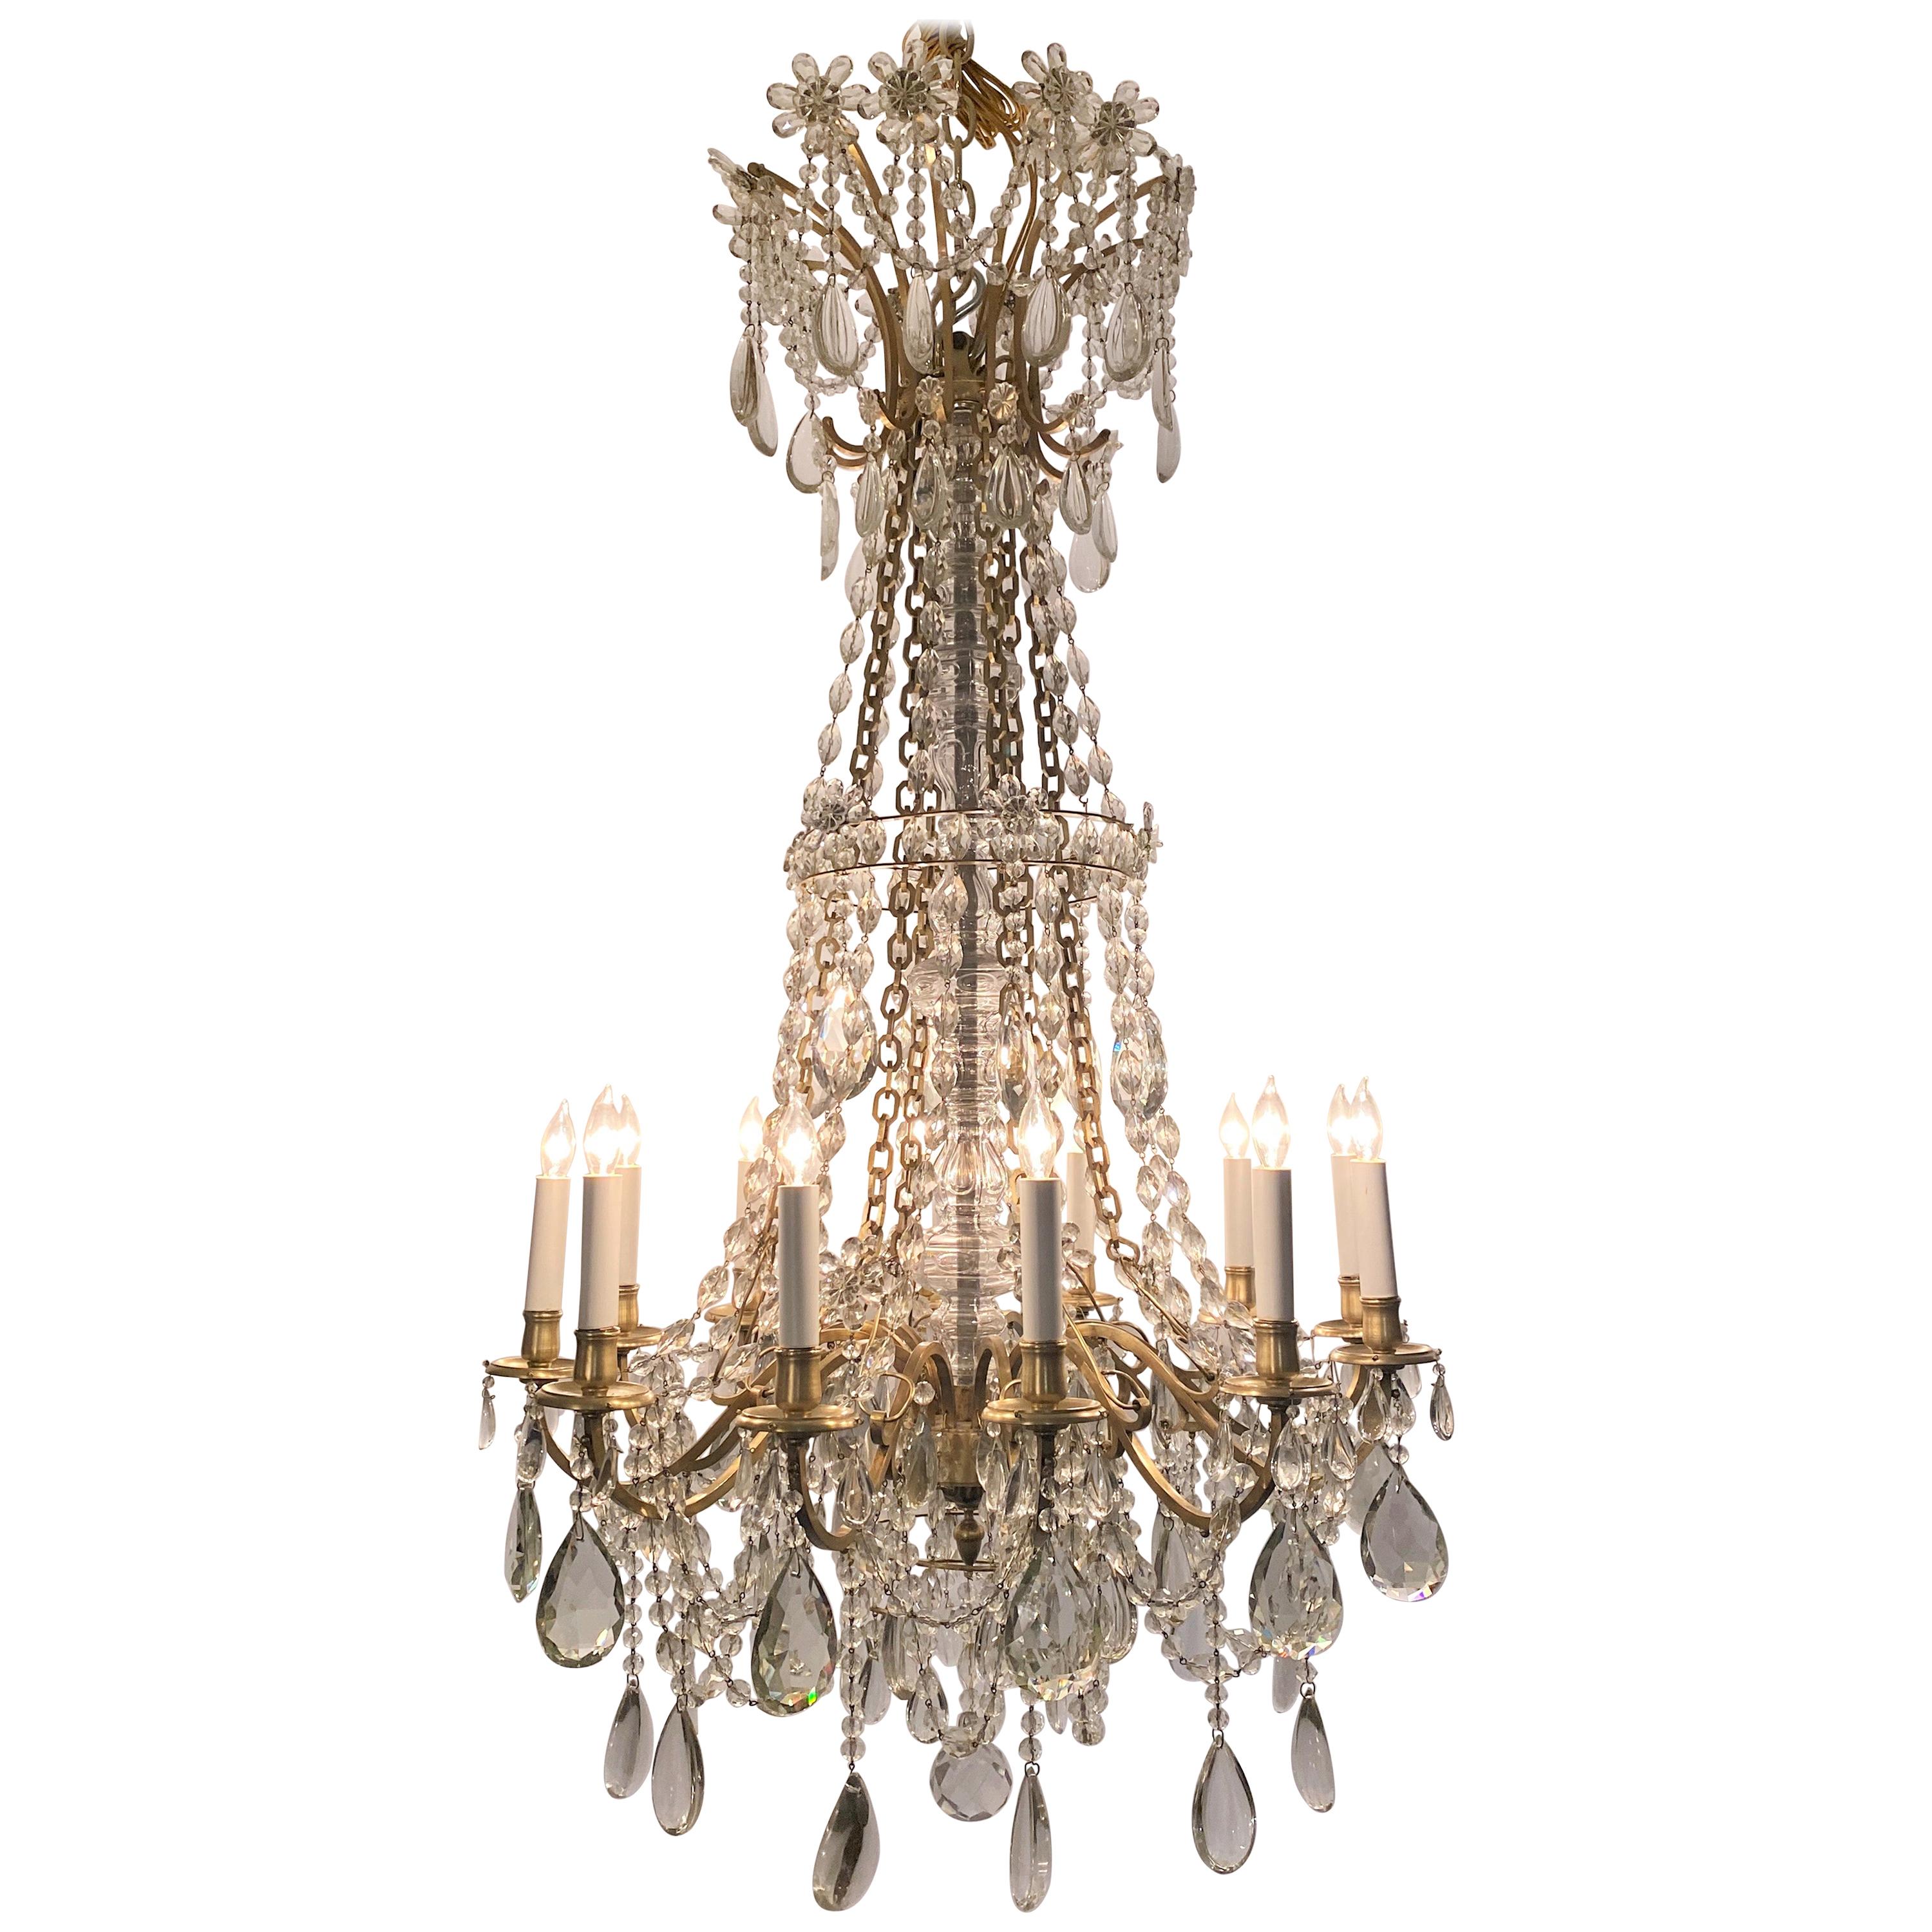 Antique French Baccarat Crystal and Bronze D'Ore Chandelier, circa 1890